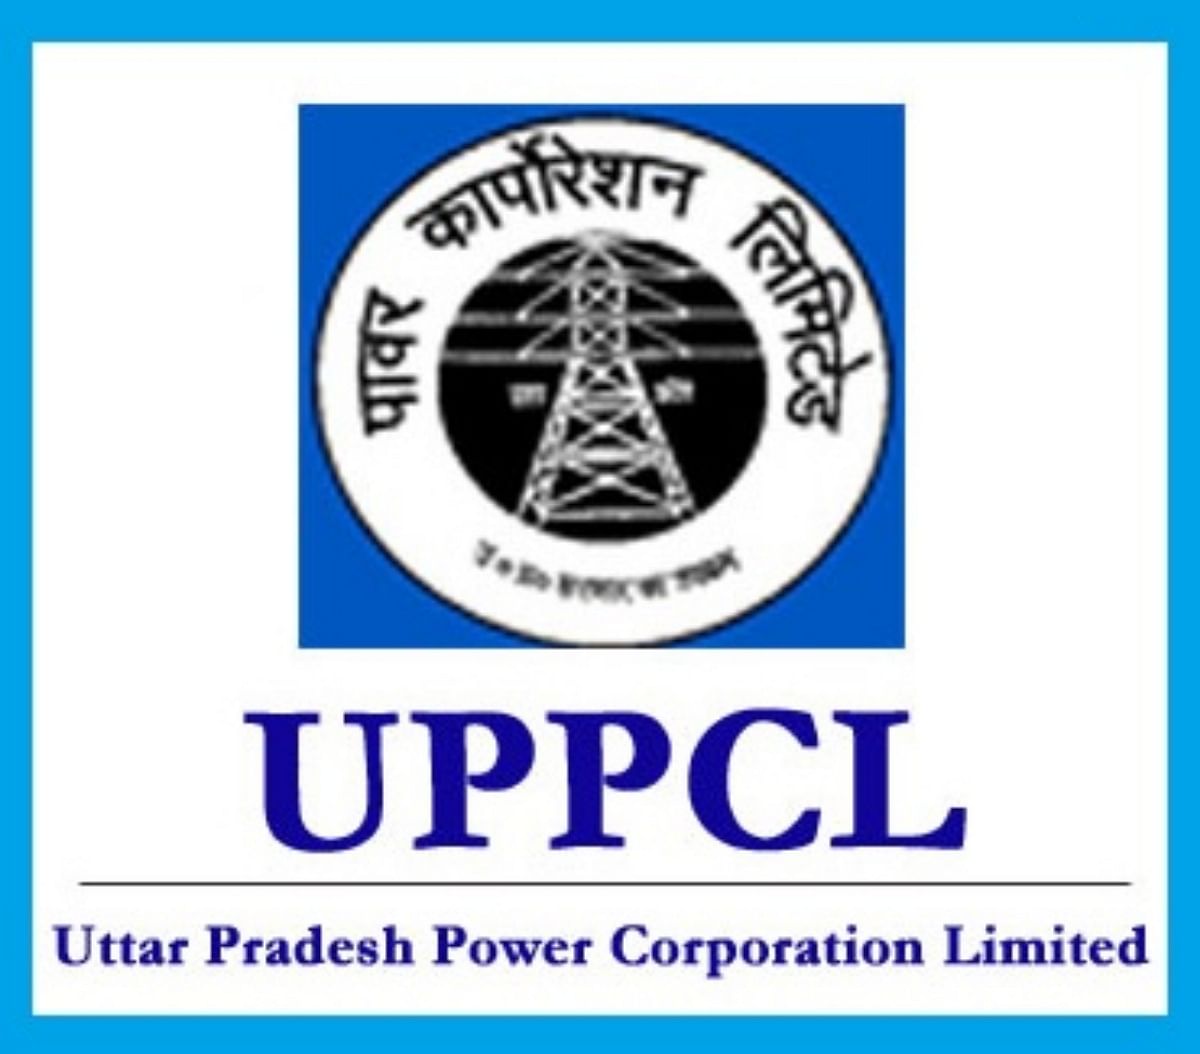 UPPCL Recruitment 2020: Last 2 Days Left to Apply for 212 Junior Engineer Vacancy, Details Here